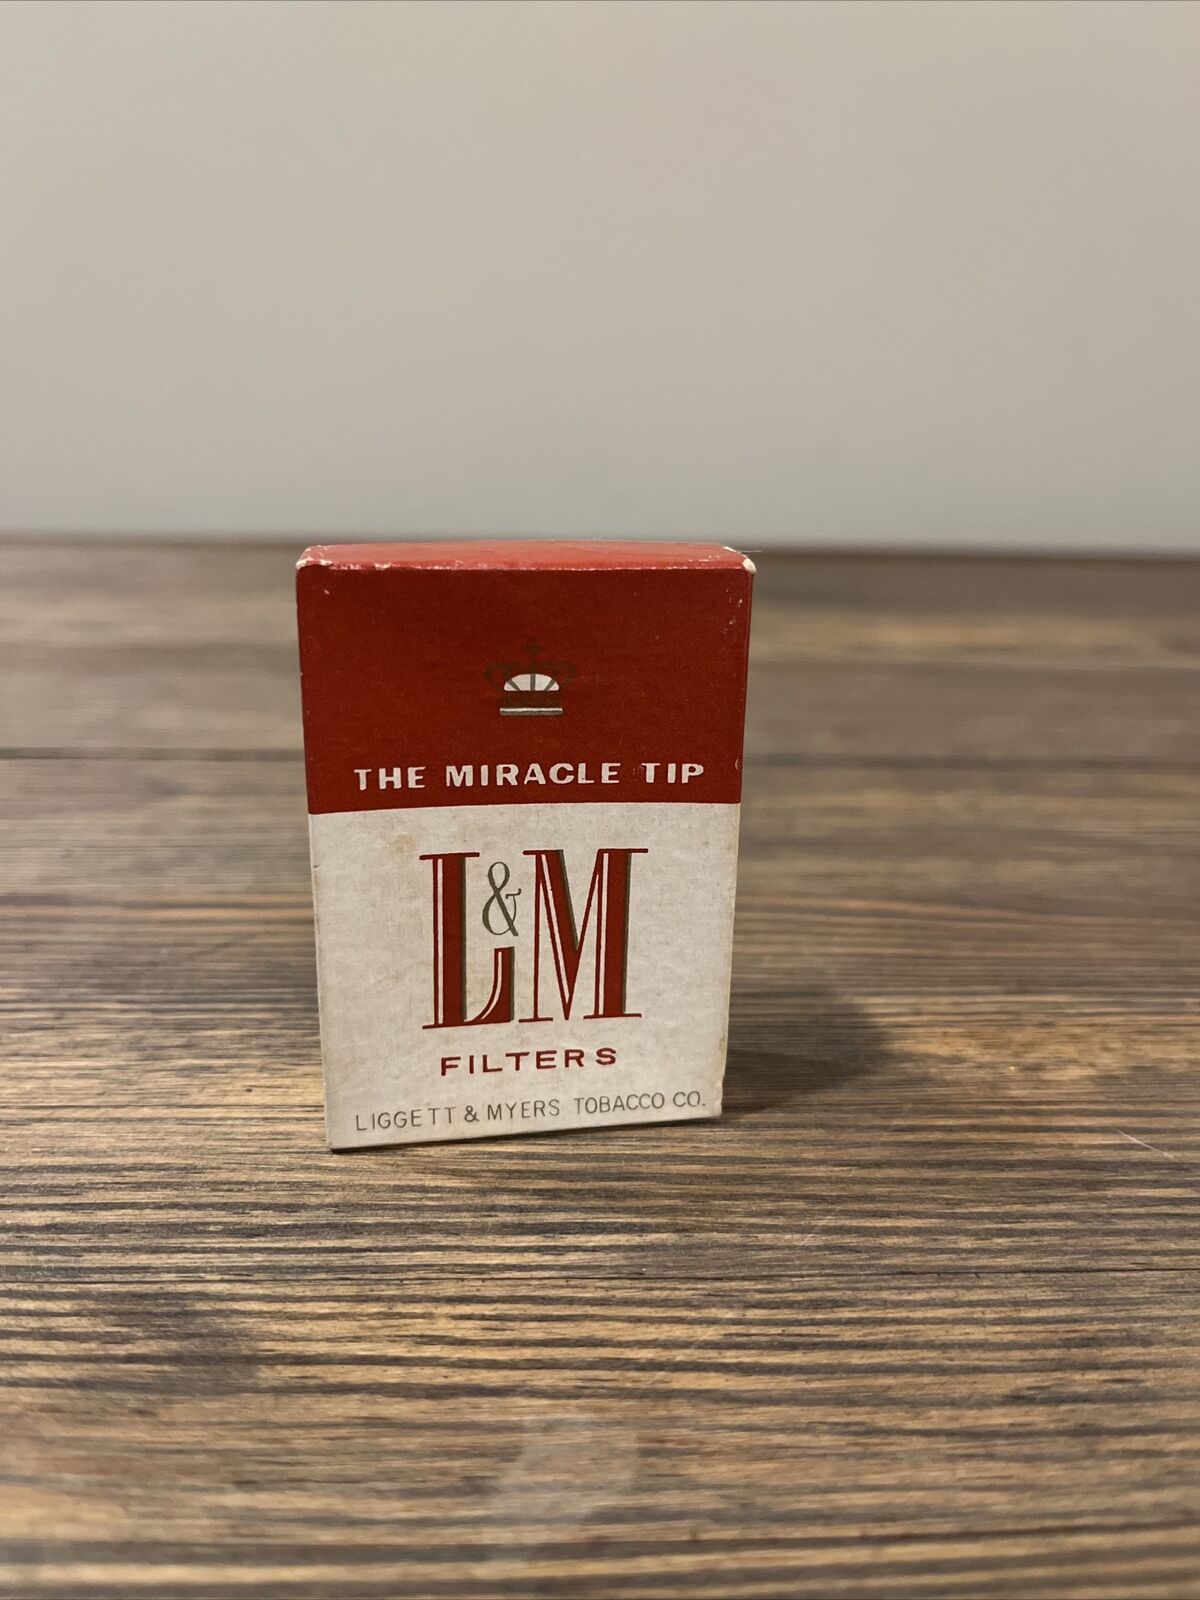 VINTAGE UNFIRED L & M Cigarette Lighter The Miracle Tip Continental Box